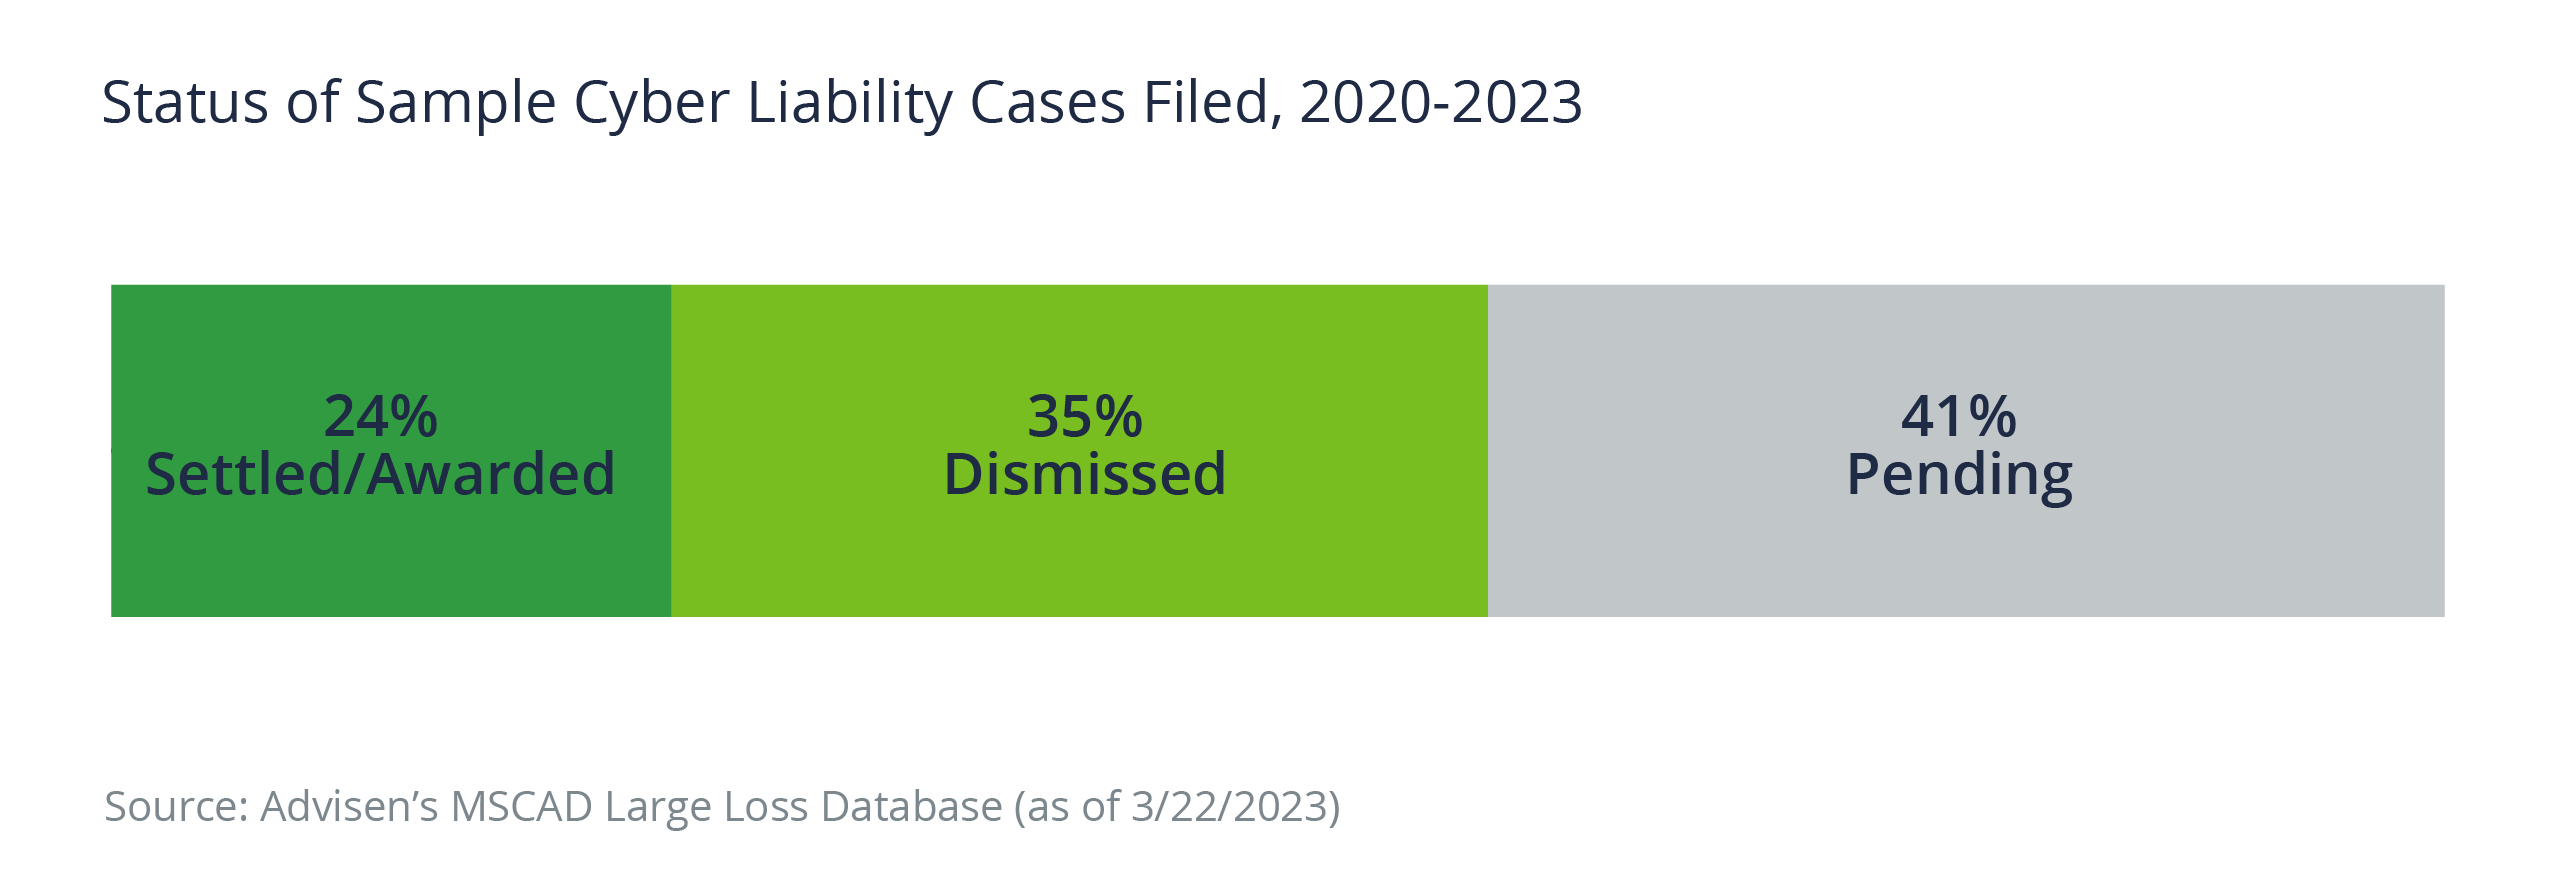 Status of Sample Cyber Liability Cases Filed, 2020-2023